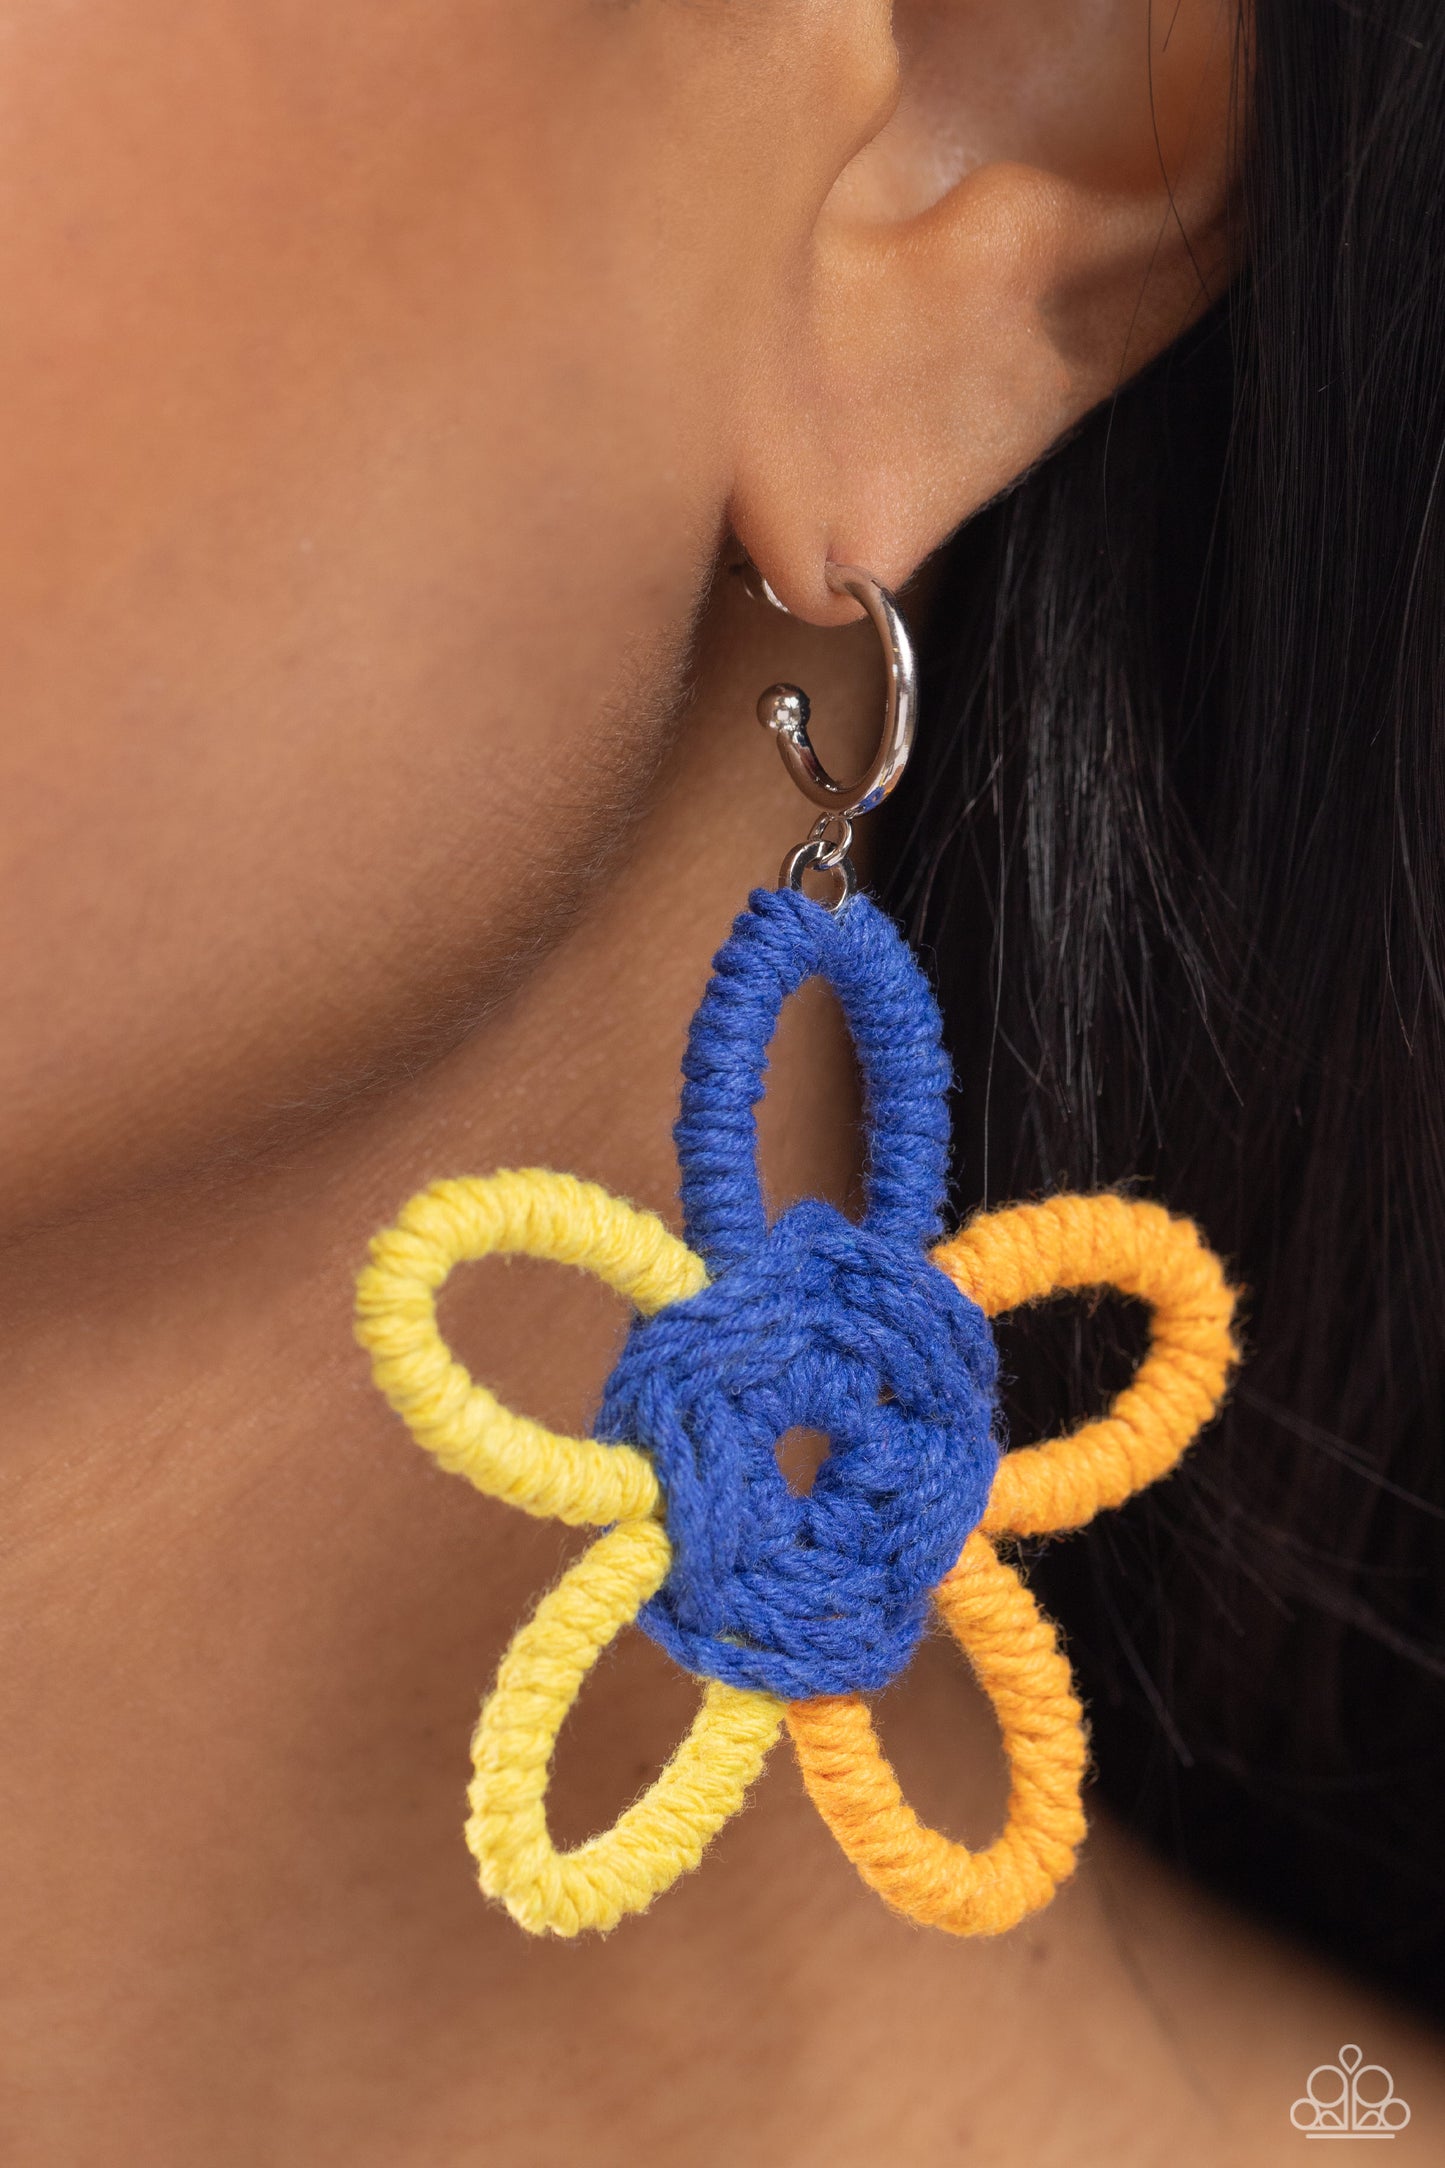 Paparazzi Accessories - Spin a Yarn - Orange Earrings featuring high visibility, Persian Jewel, and orange yarn, an oversized flower swings freely from a dainty silver hoop, creating a playful lure. Earring attaches to a standard post fitting. Hoop measures approximately 1/2" in diameter.  Sold as one pair of hoop earrings.